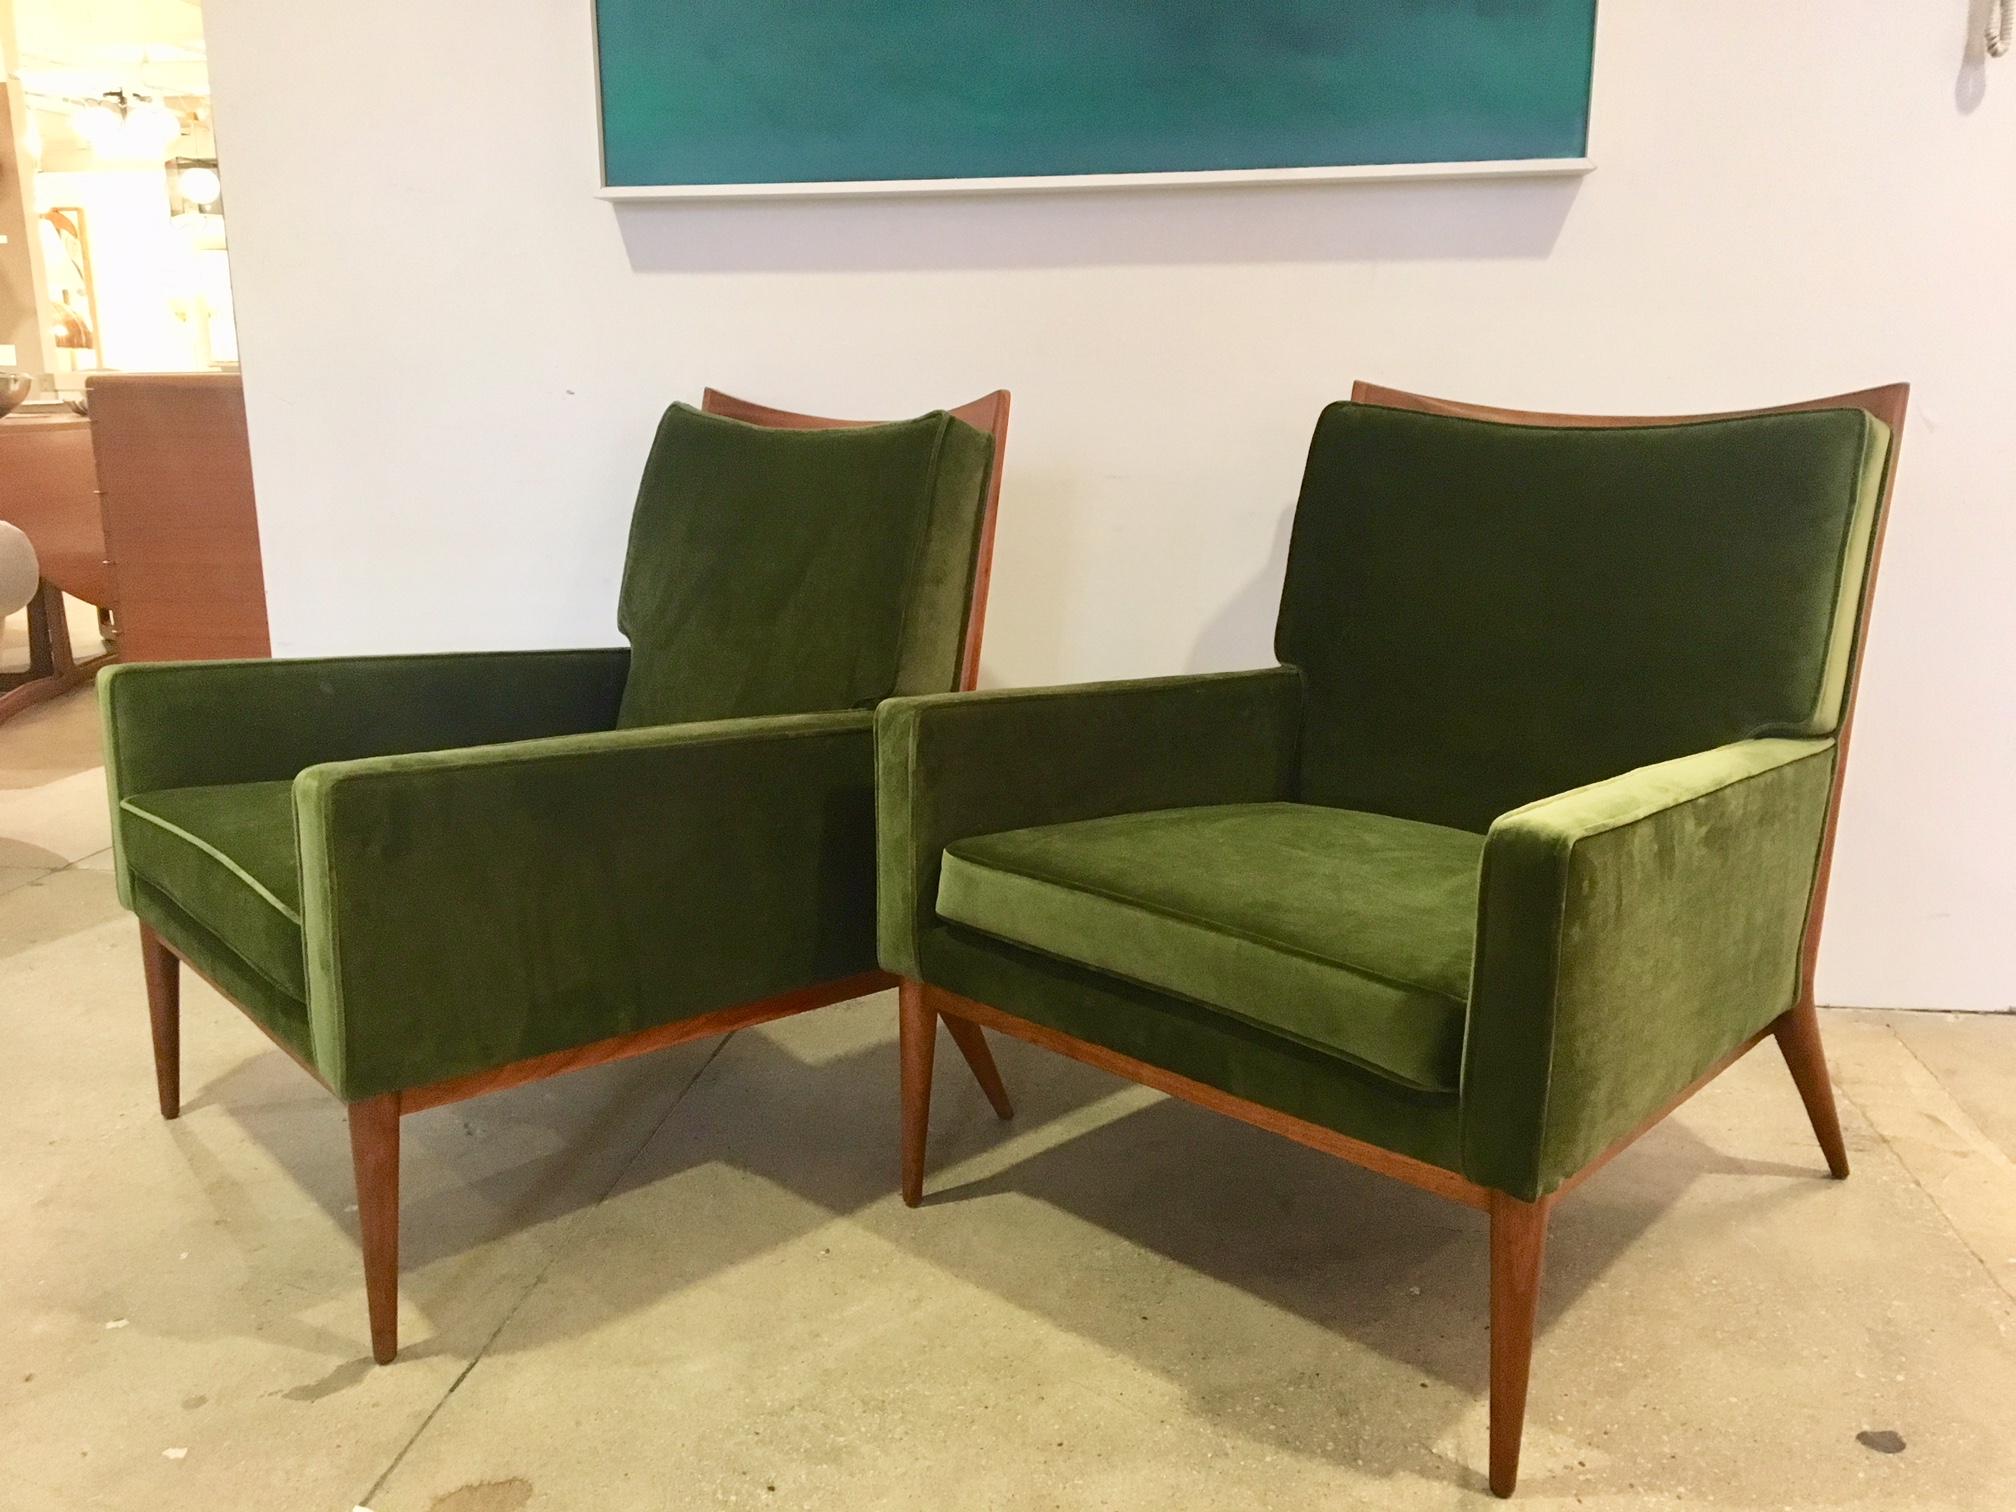 Great pair of McCobb lounge chairs for Directional, newly refinished in natural and reupholstered in emerald green velvet. By far McCobb’s most elegant chairs!
  